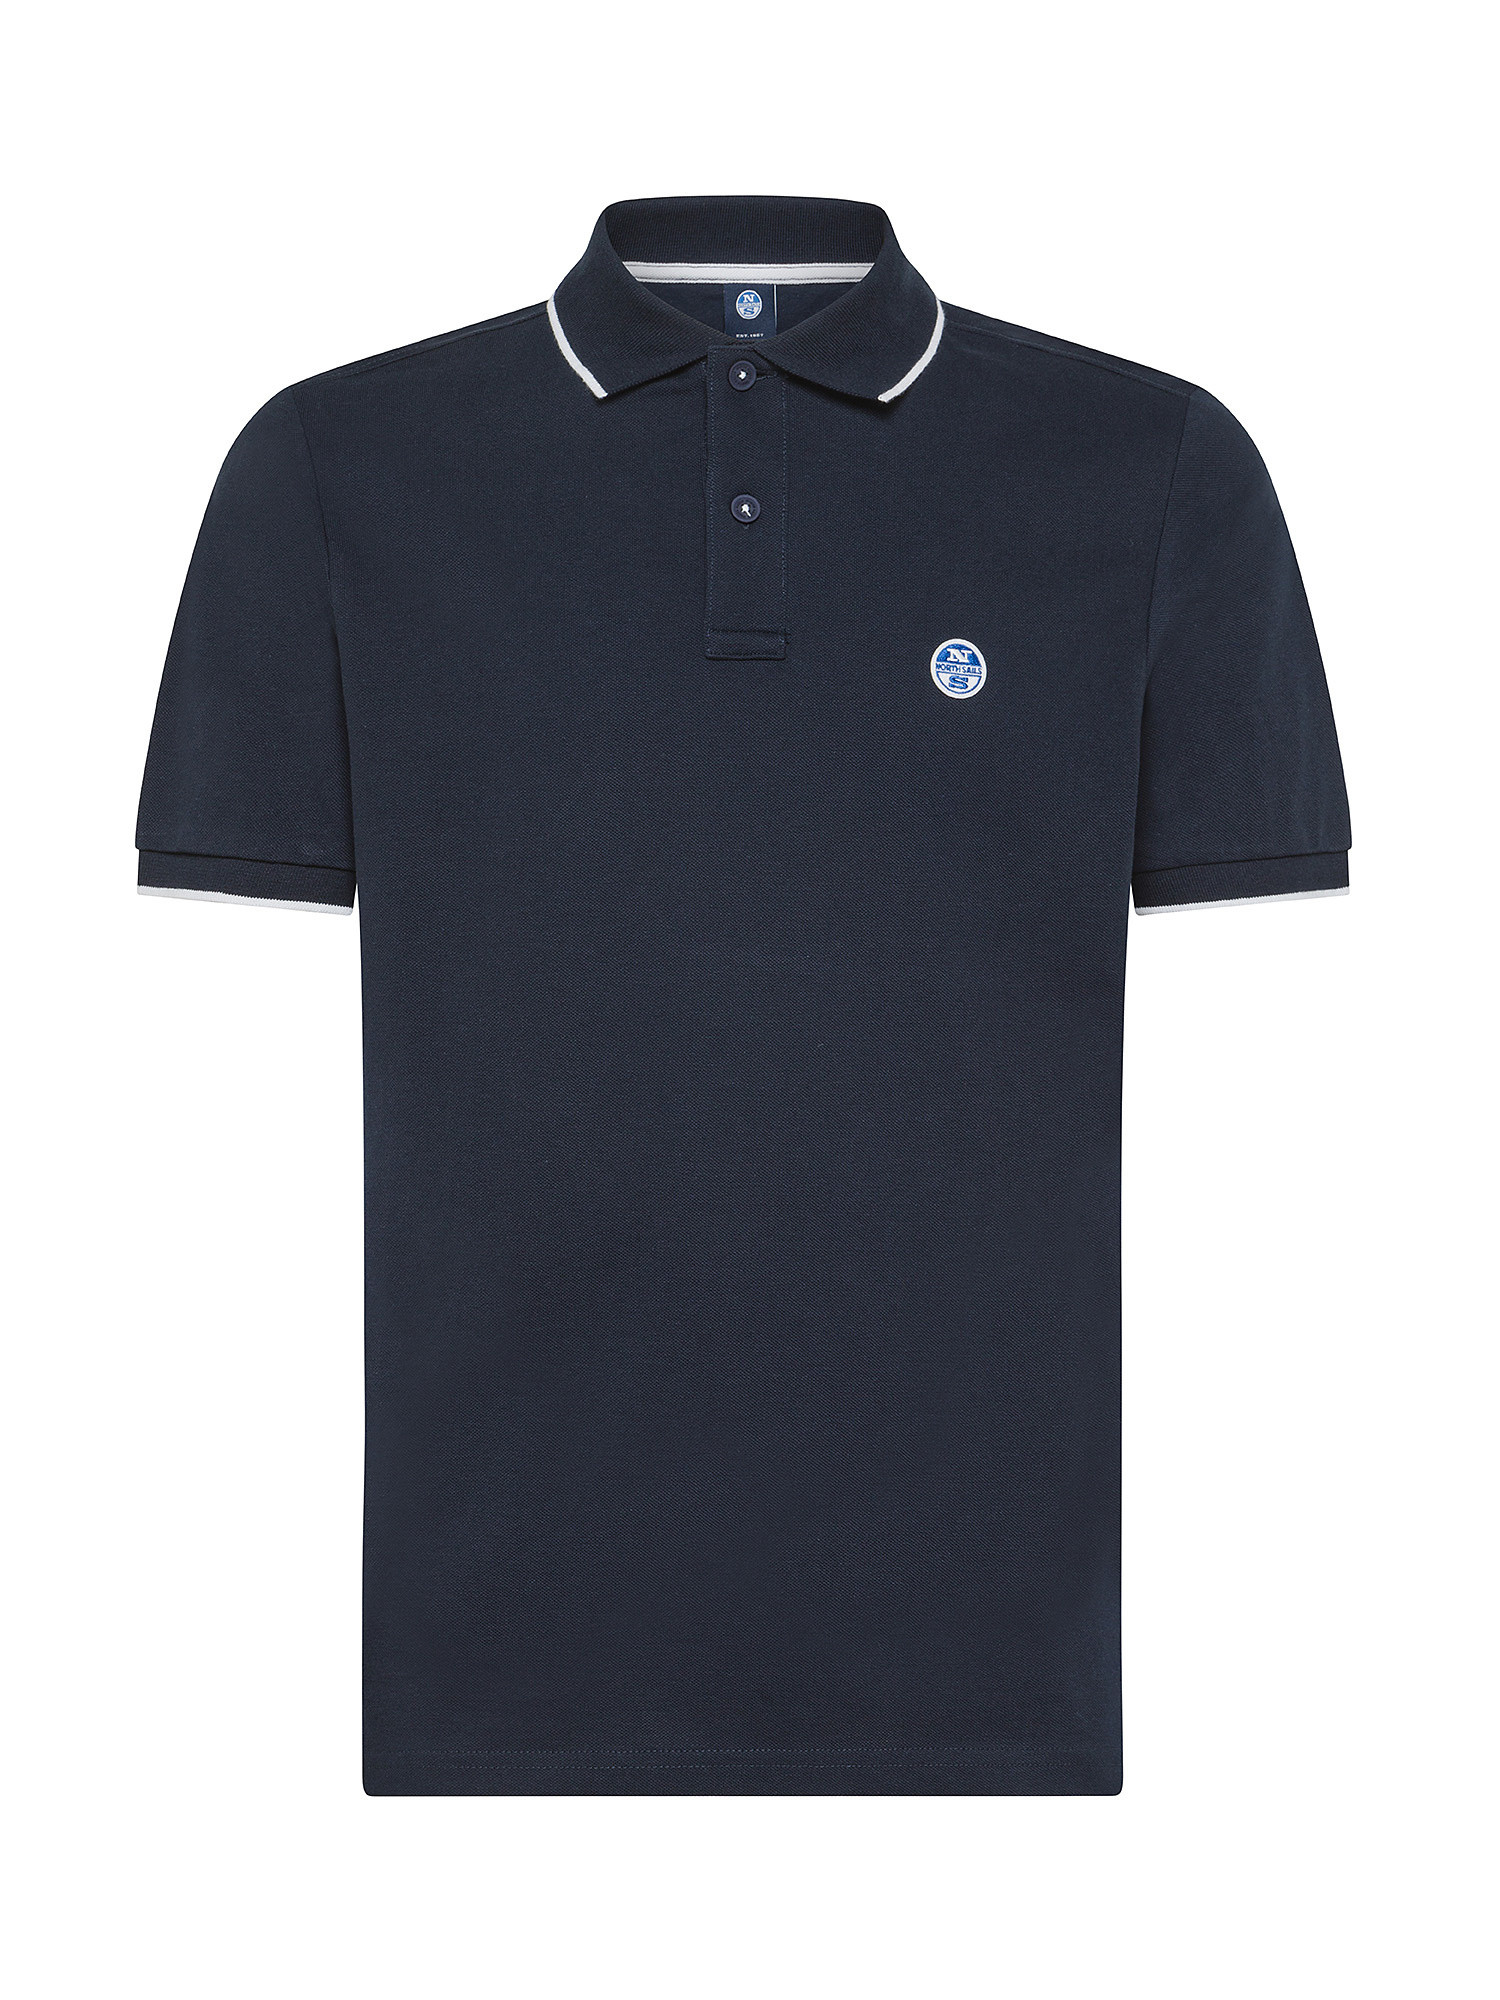 North Sails - Organic cotton piqué polo shirt with micrologo, Blue, large image number 0